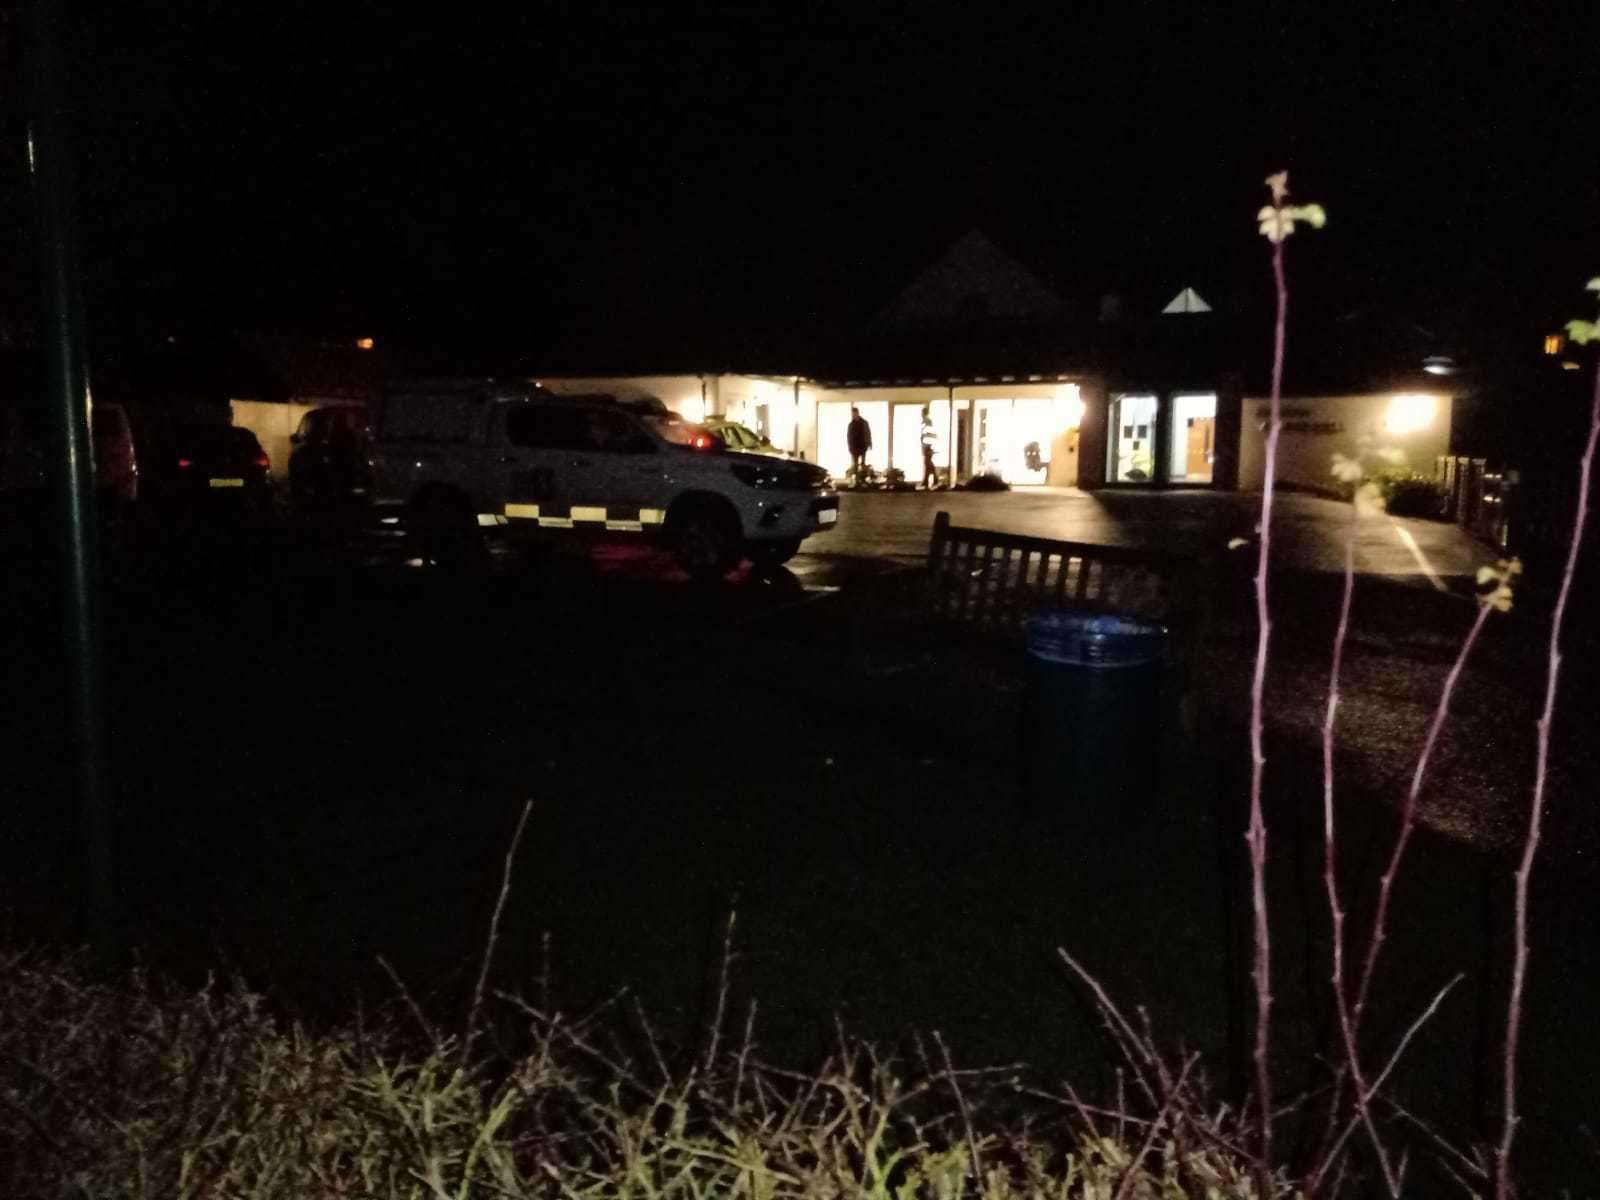 Barham Village Hall is acting as a centre of operations for the search effort